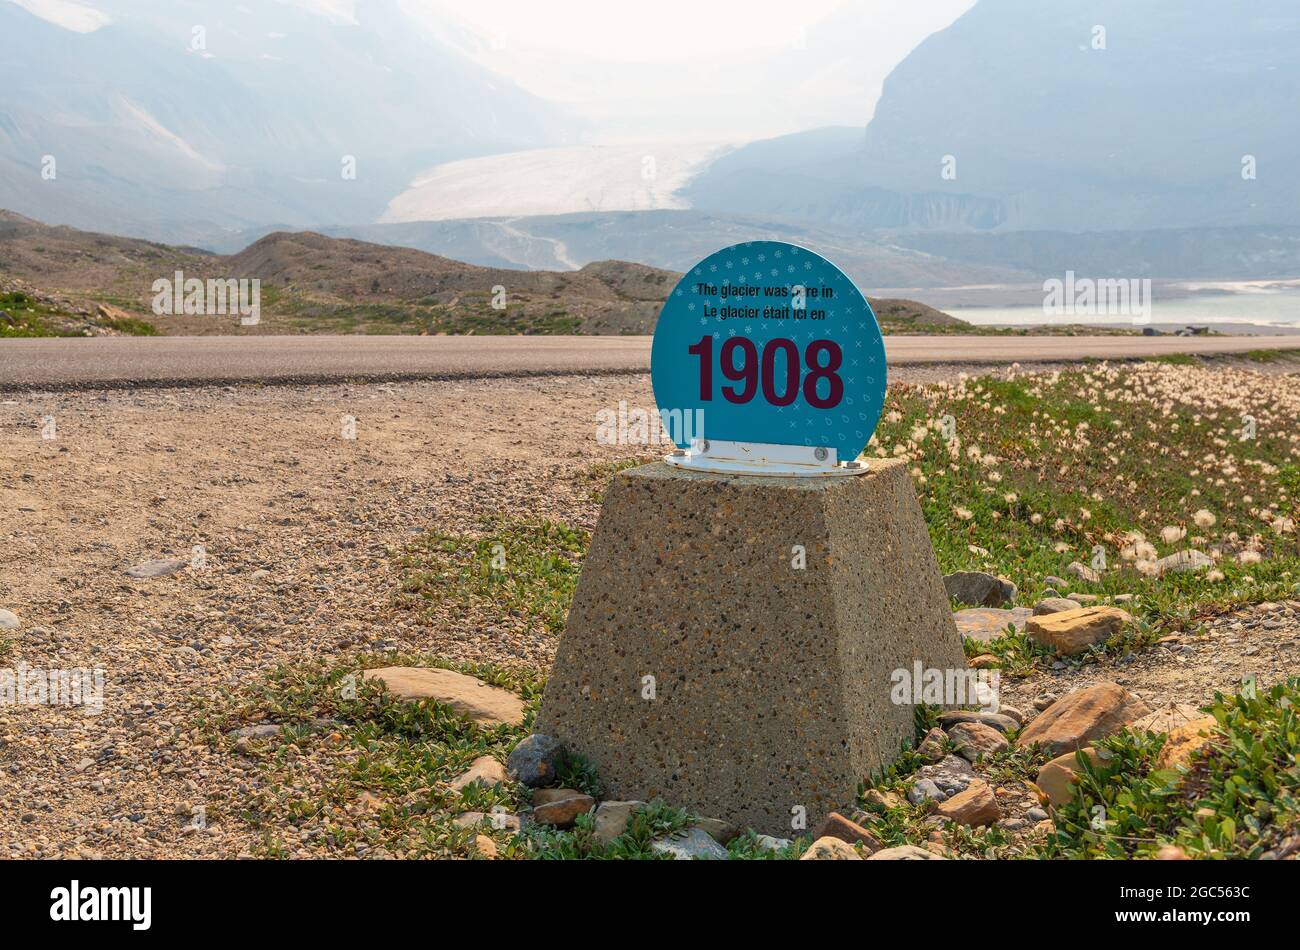 Athabasca glacier with mile post sign showing climate change effect on ice retreat since 1908, with wildfires smoke haze in the air, Alberta, Canada. Stock Photo